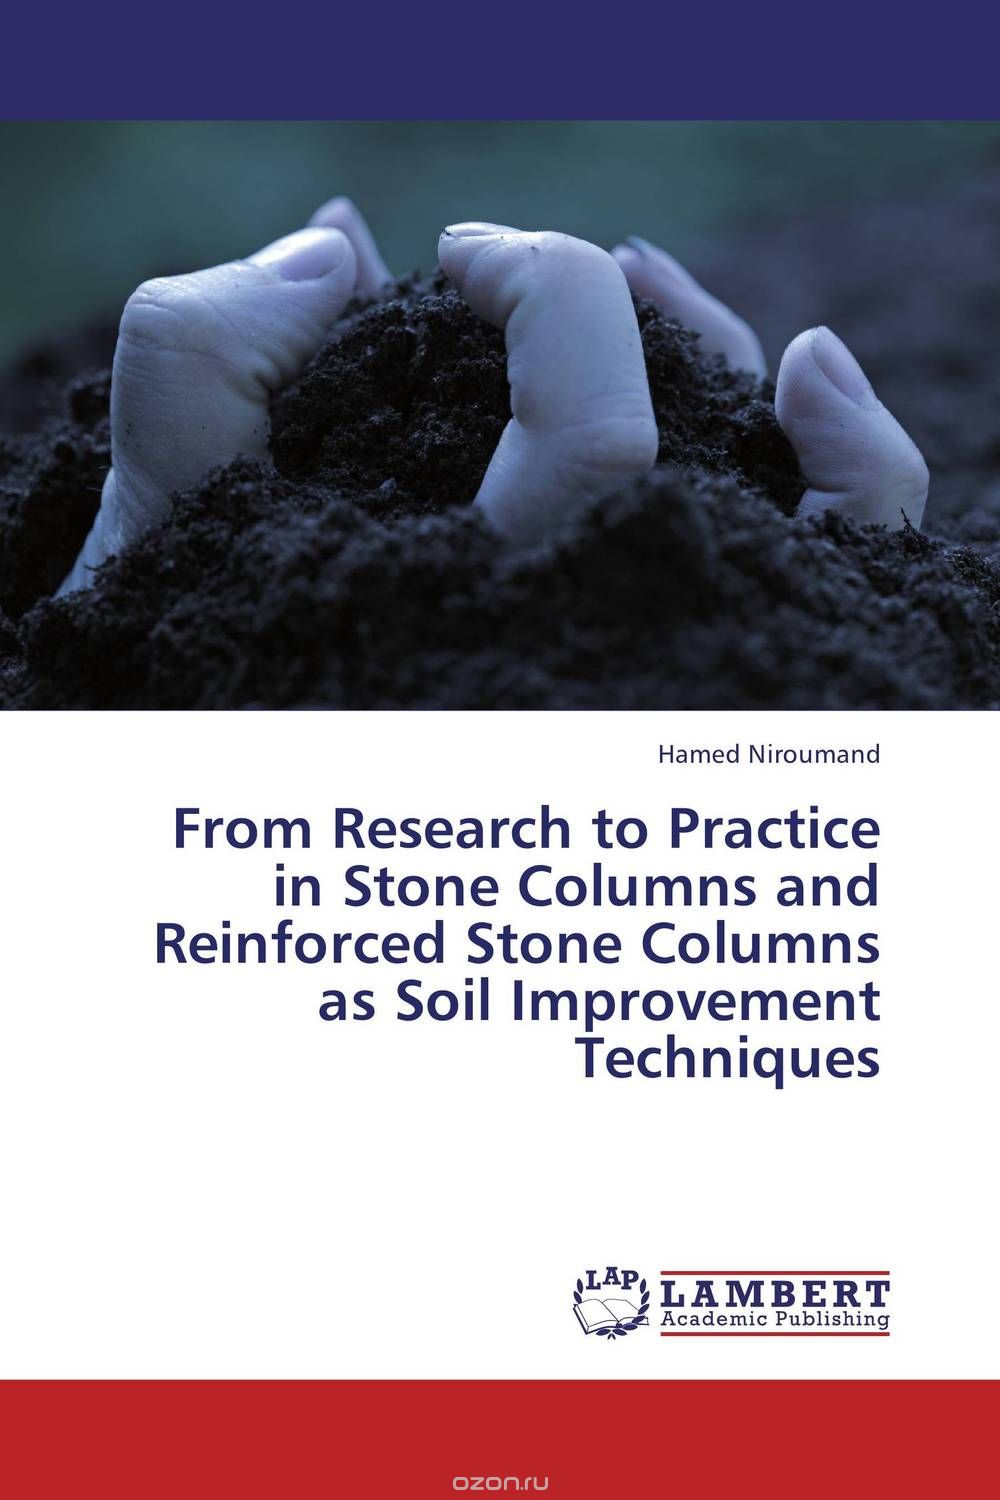 Скачать книгу "From Research to Practice  in Stone Columns and  Reinforced Stone Columns  as Soil Improvement Techniques"